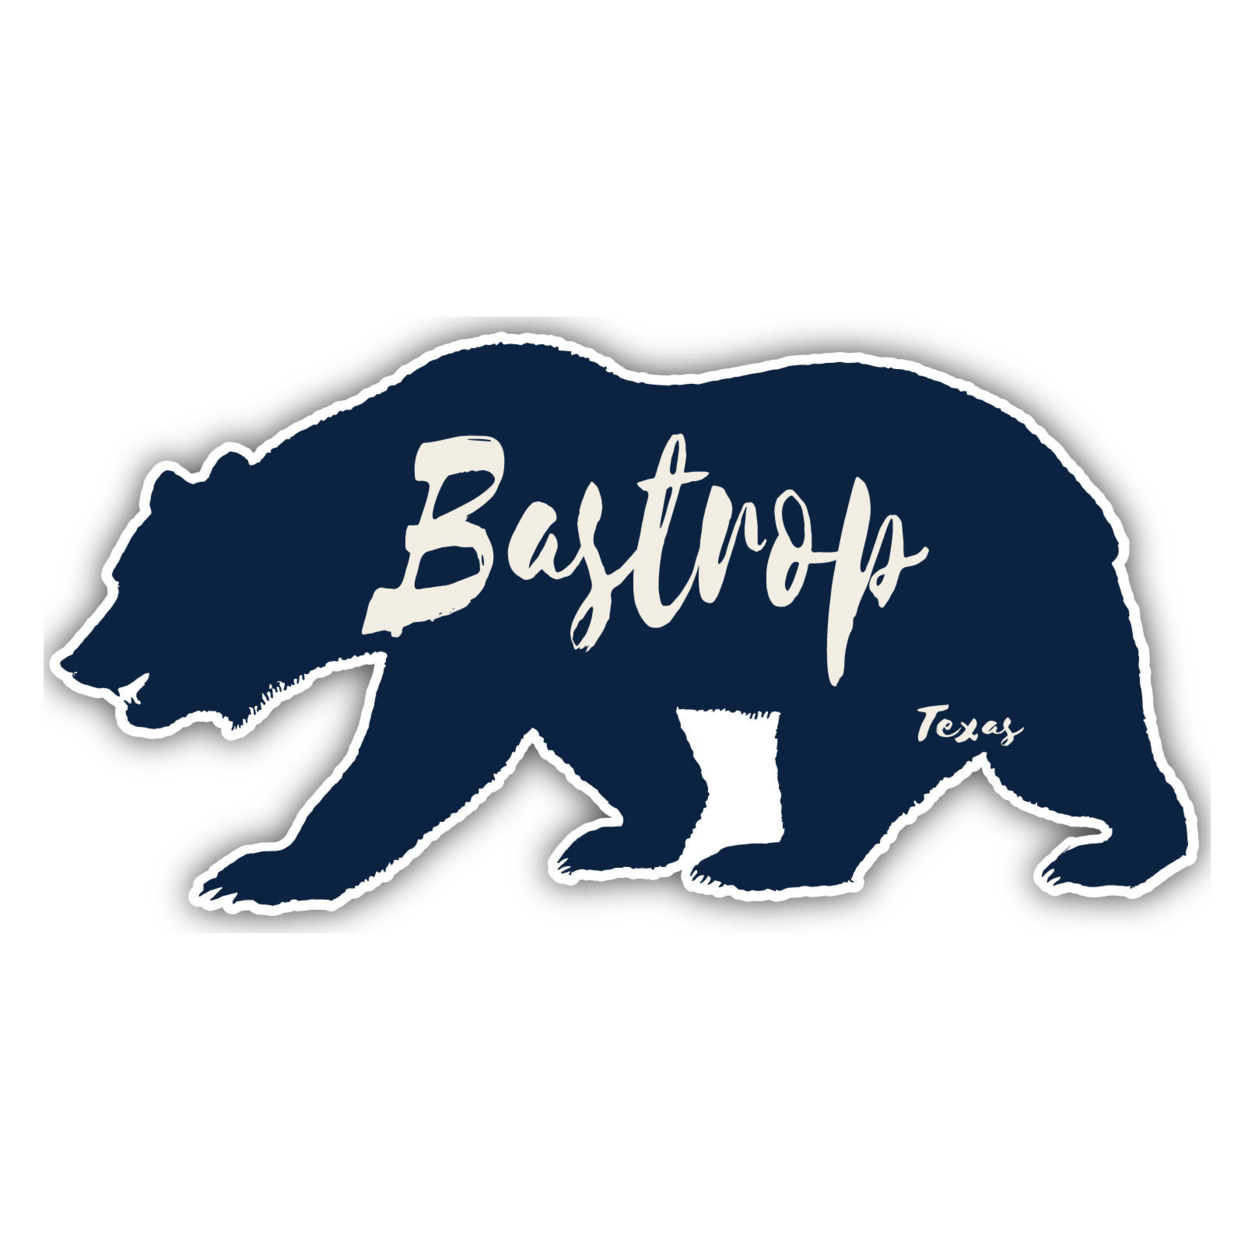 Bastrop Texas Souvenir Decorative Stickers (Choose Theme And Size) - 4-Pack, 2-Inch, Bear